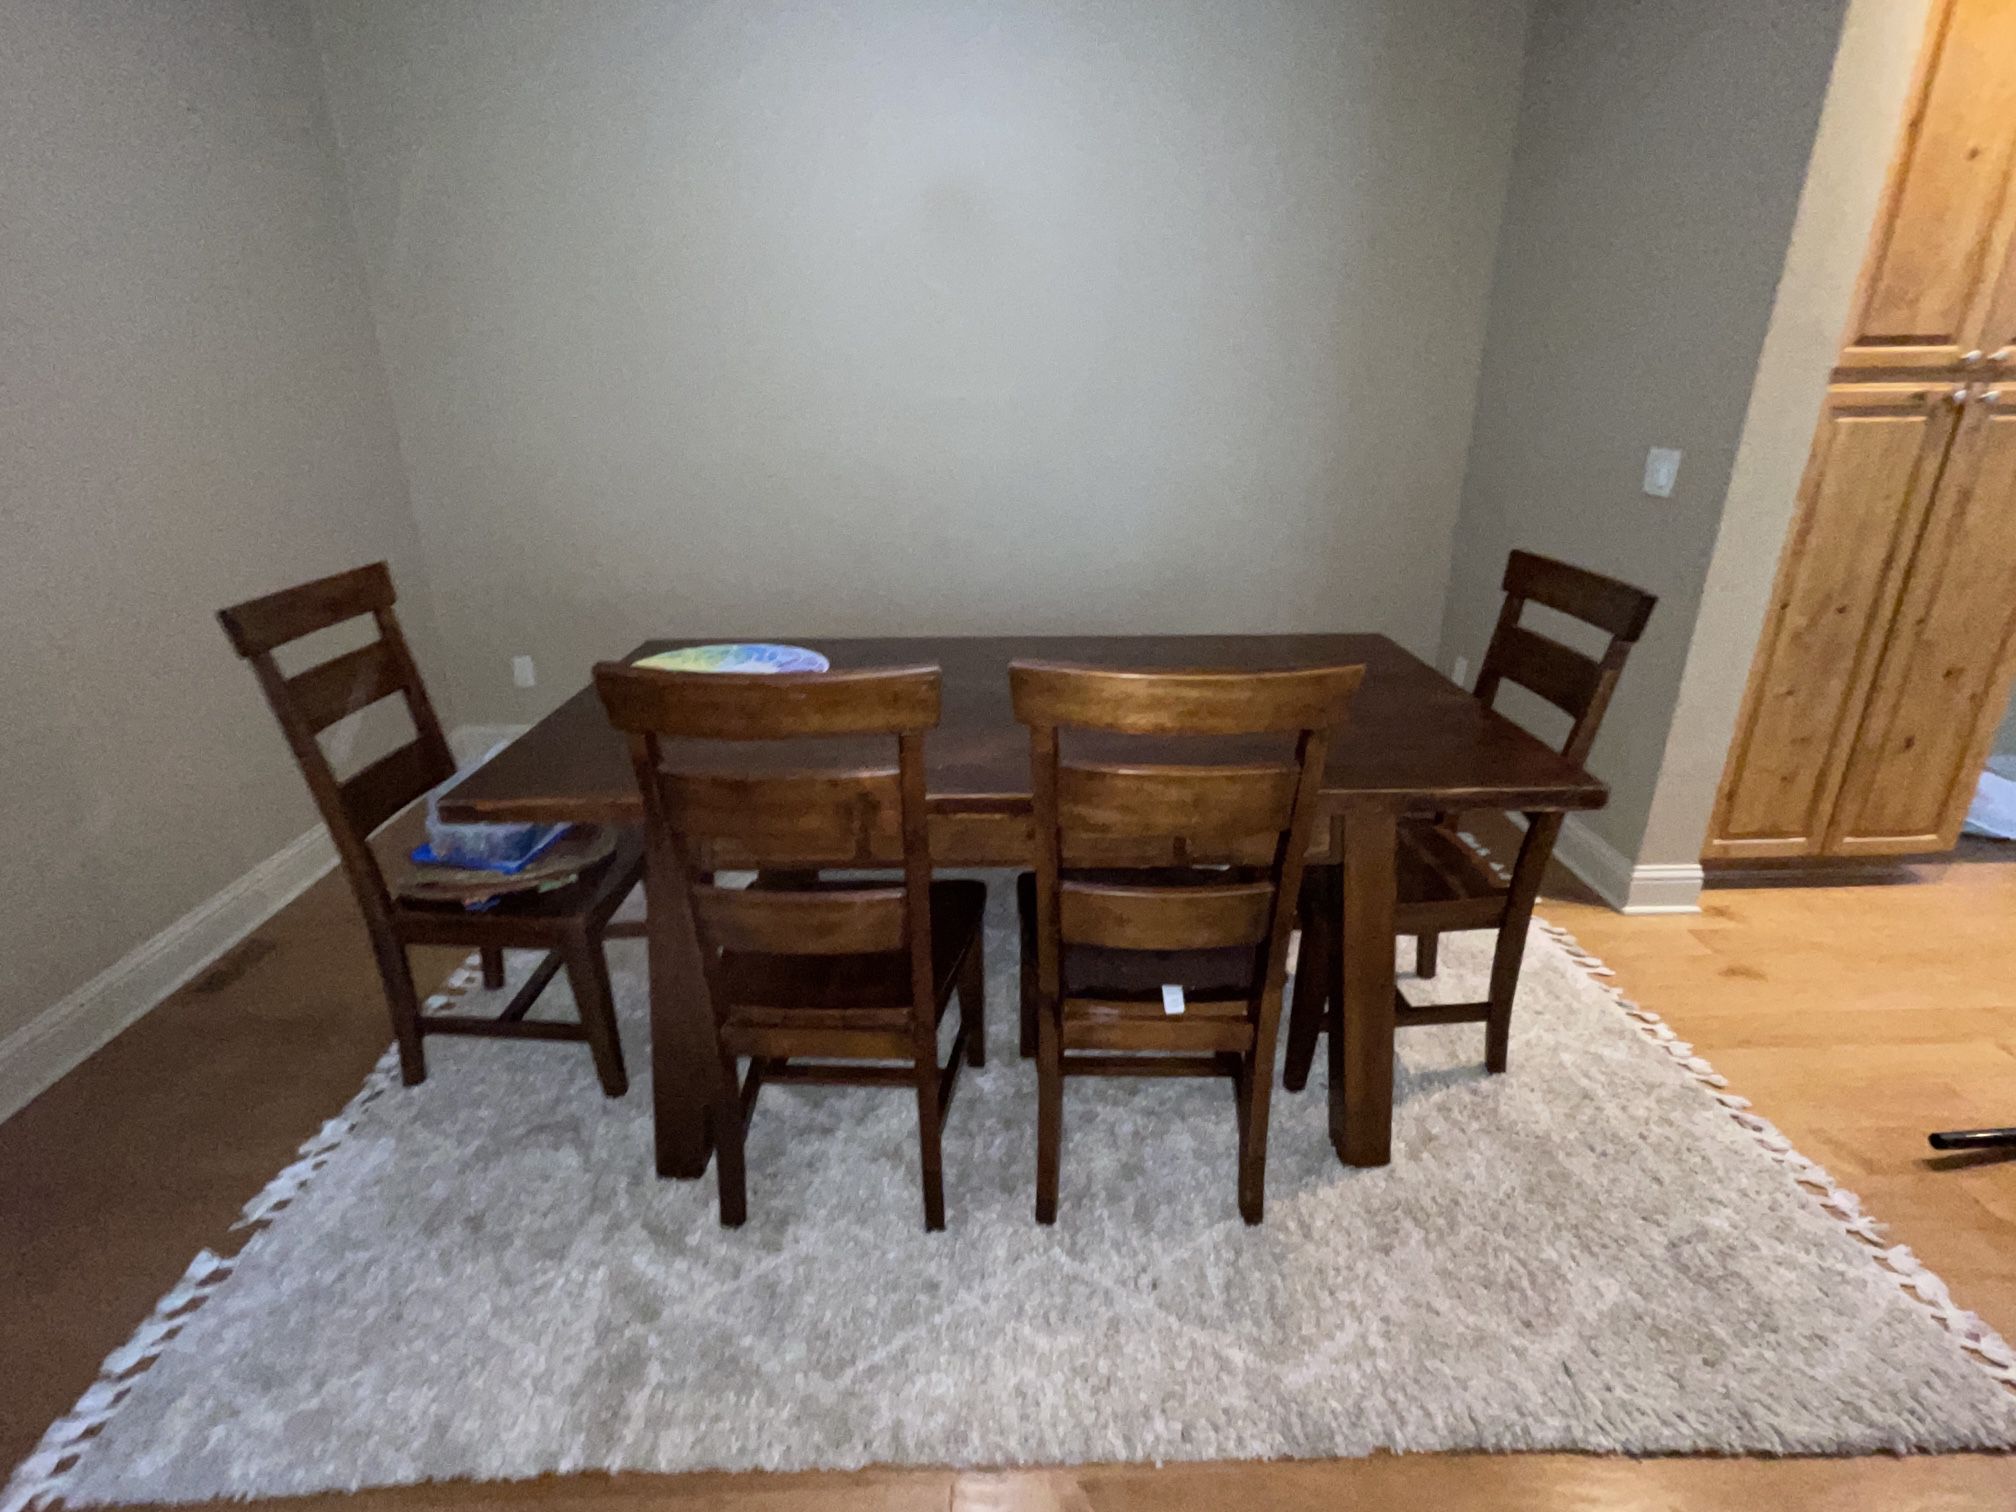 PENDING P/U…World Market Dining Room Table + 4 Chairs & Bench Seat (used) 